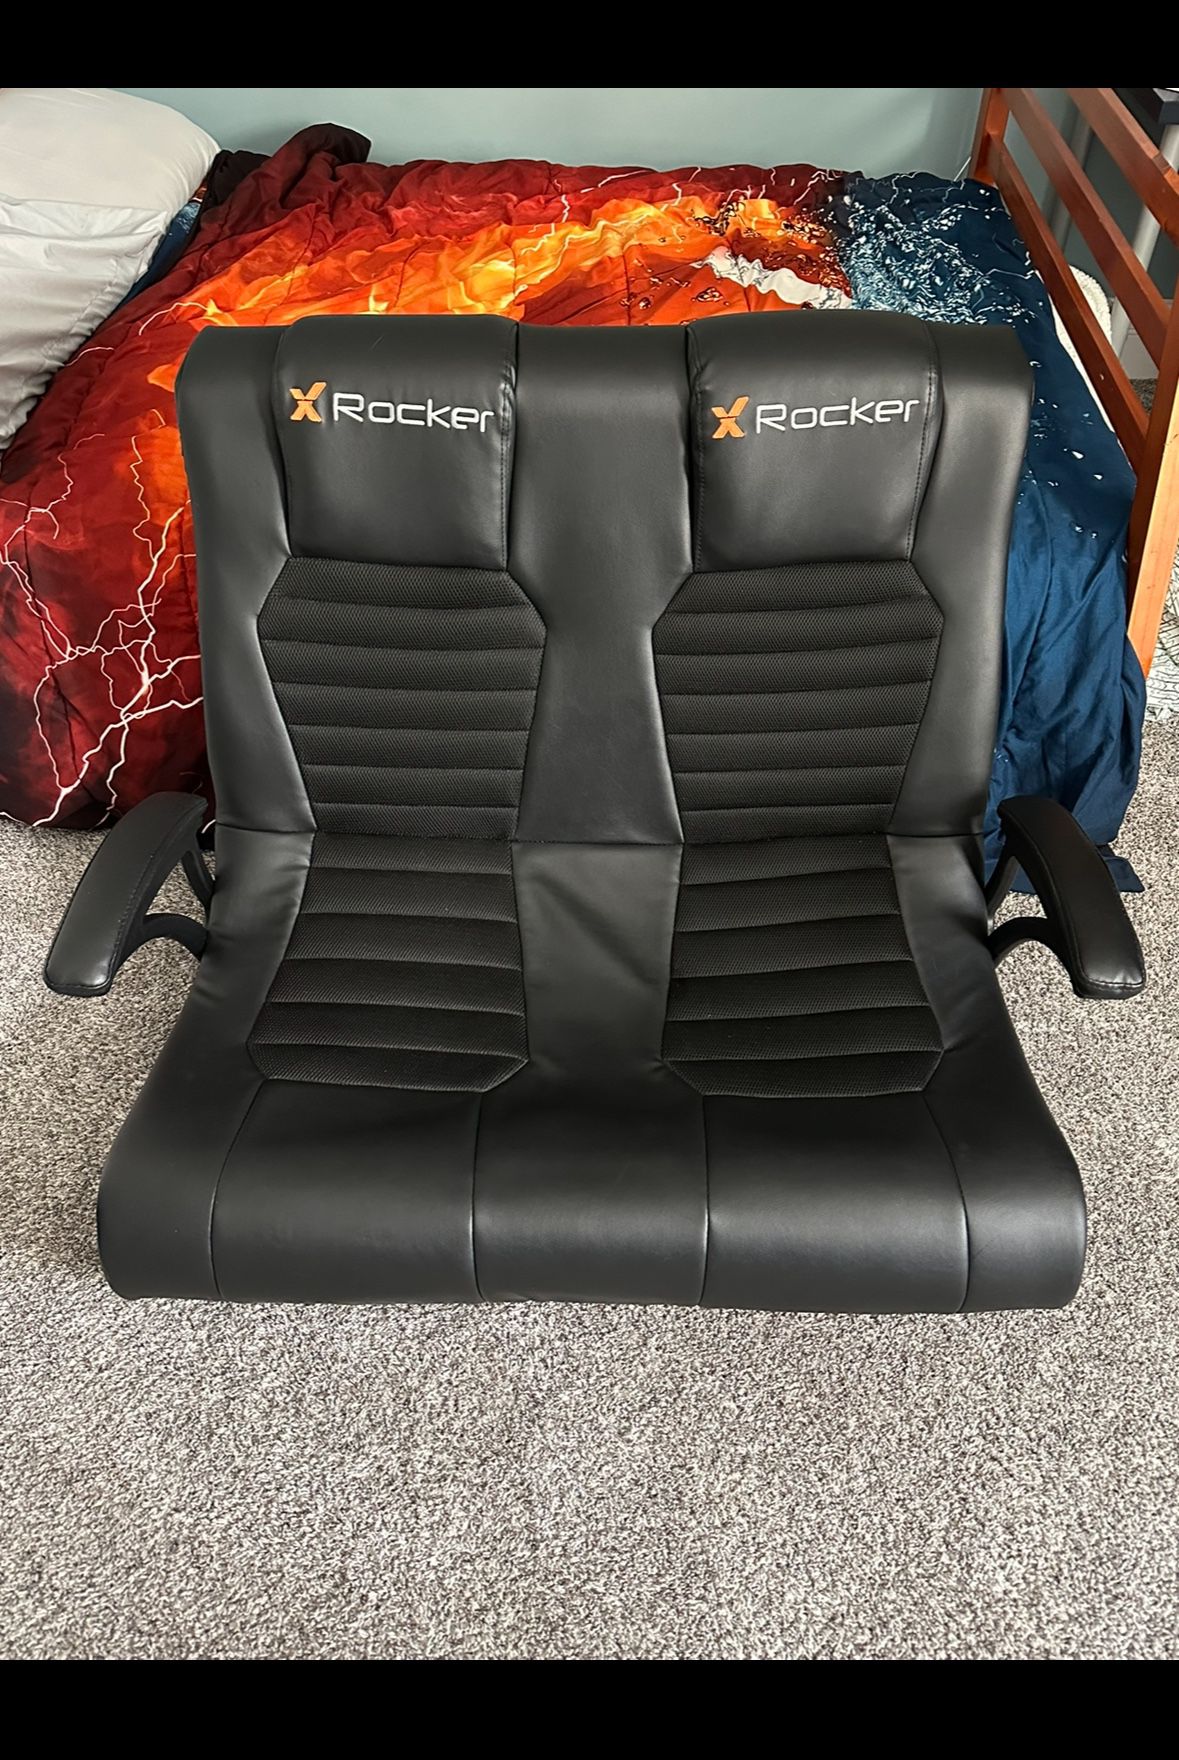 X Rocker Dual Commander Floor Rocking Gaming Chair Couch XL Duel Double Set Chairs Speakers & Subwoofer XBOX ONE Series X PS4 Nintendo Switch PS5 🎮🔊